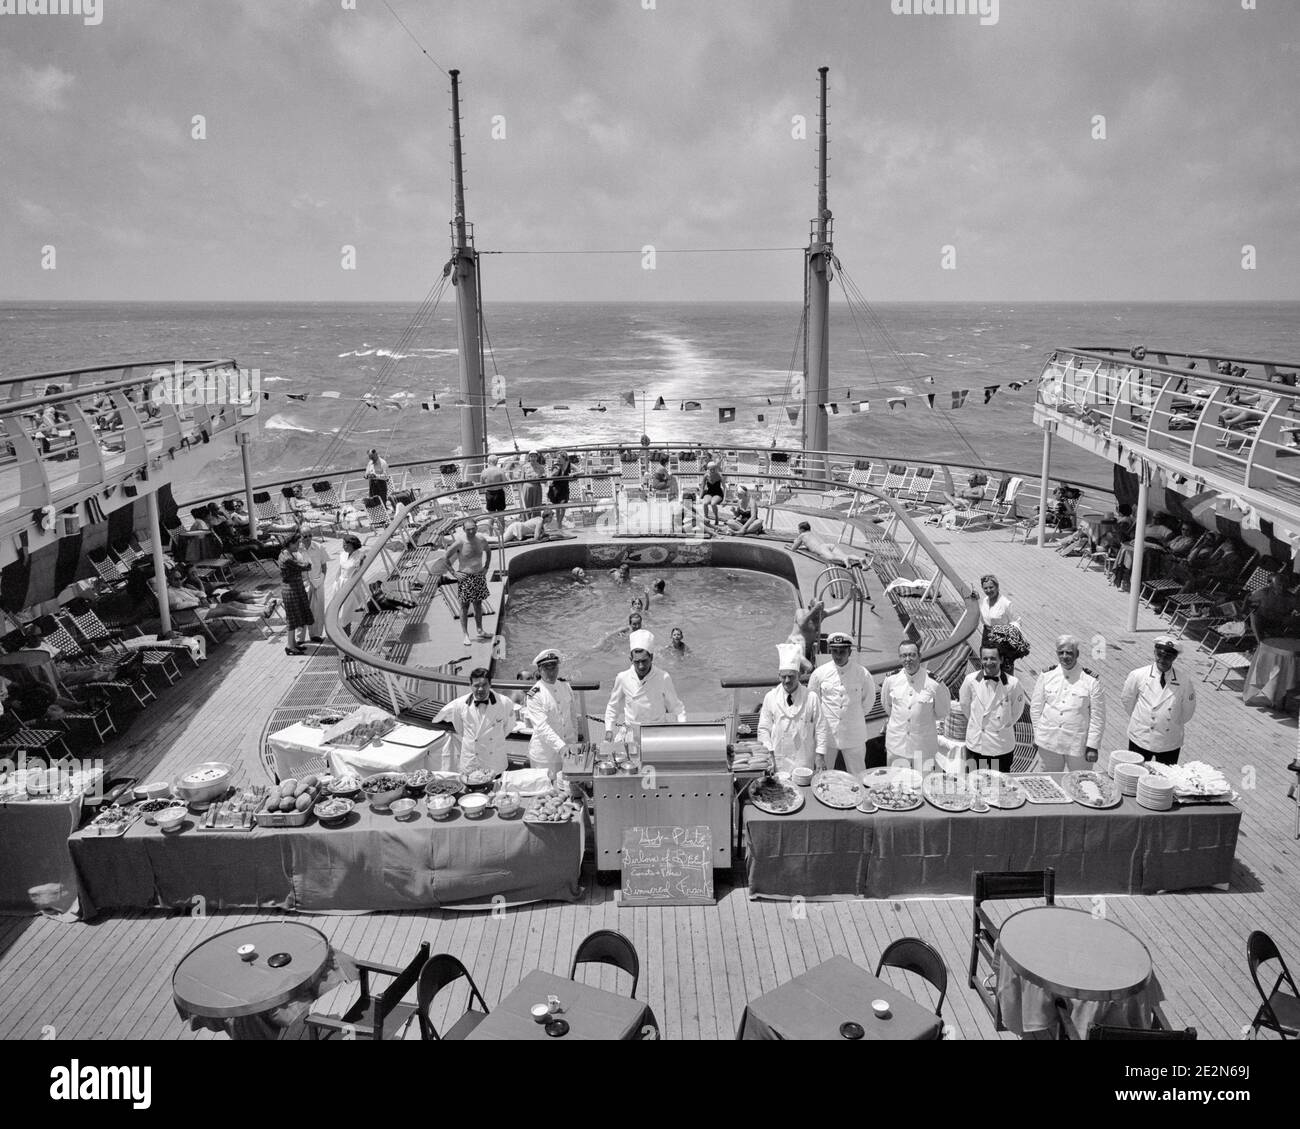 1950s BUFFET LUNCH SERVING CREW STAFF ASSEMBLED ABOARD THE AFT DECK BY SWIMMING POOL ON THE CRUISE SHIP SS INDEPENDENCE AT SEA - s11969 RGE001 HARS BUFFET LUXURY COPY SPACE FULL-LENGTH LADIES PERSONS MALES PROFESSION SHIPS TRANSPORTATION AFTER B&W TIME OFF SKILL TEMPTATION OCCUPATION SKILLS HIGH ANGLE ADVENTURE LEISURE CUSTOMER SERVICE TRIP GETAWAY CAREERS RECREATION LABOR PRIDE AT BY ON THE EMPLOYMENT HOLIDAYS OCCUPATIONS CONCEPTUAL SERVERS STYLISH ASSEMBLED EMPLOYEE AFT SS STAFF TOQUE VACATIONS ABOARD BLACK AND WHITE FOOD PREPARATION LABORING OLD FASHIONED VESSEL Stock Photo